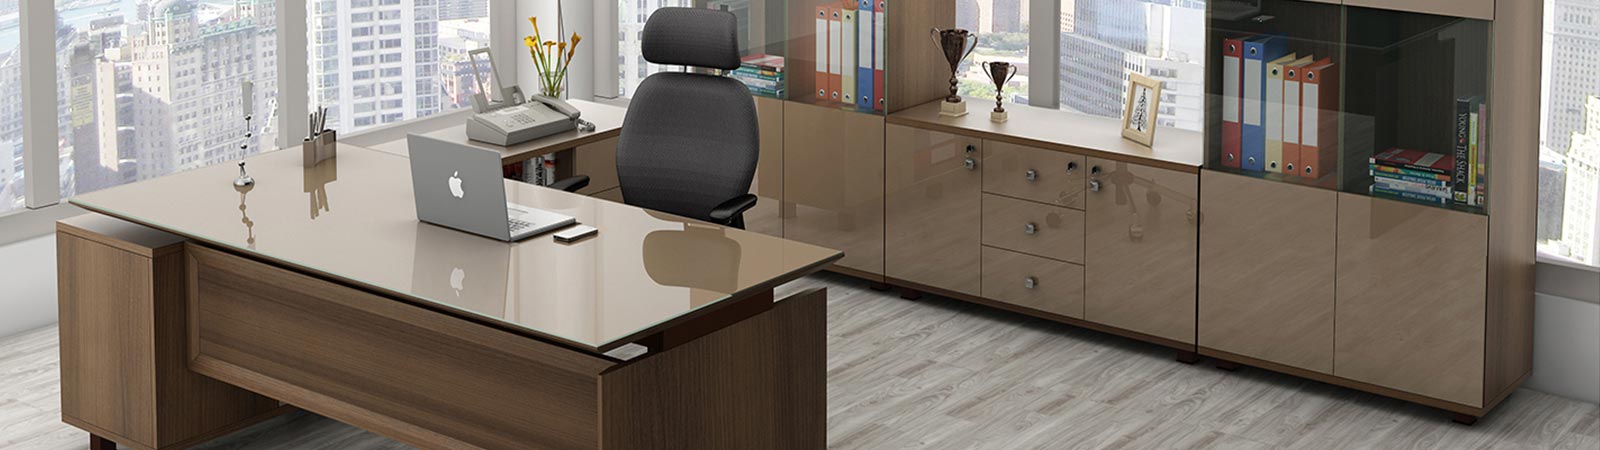 Affordable Office Tables, Reception Tables, Delhi NCR, India